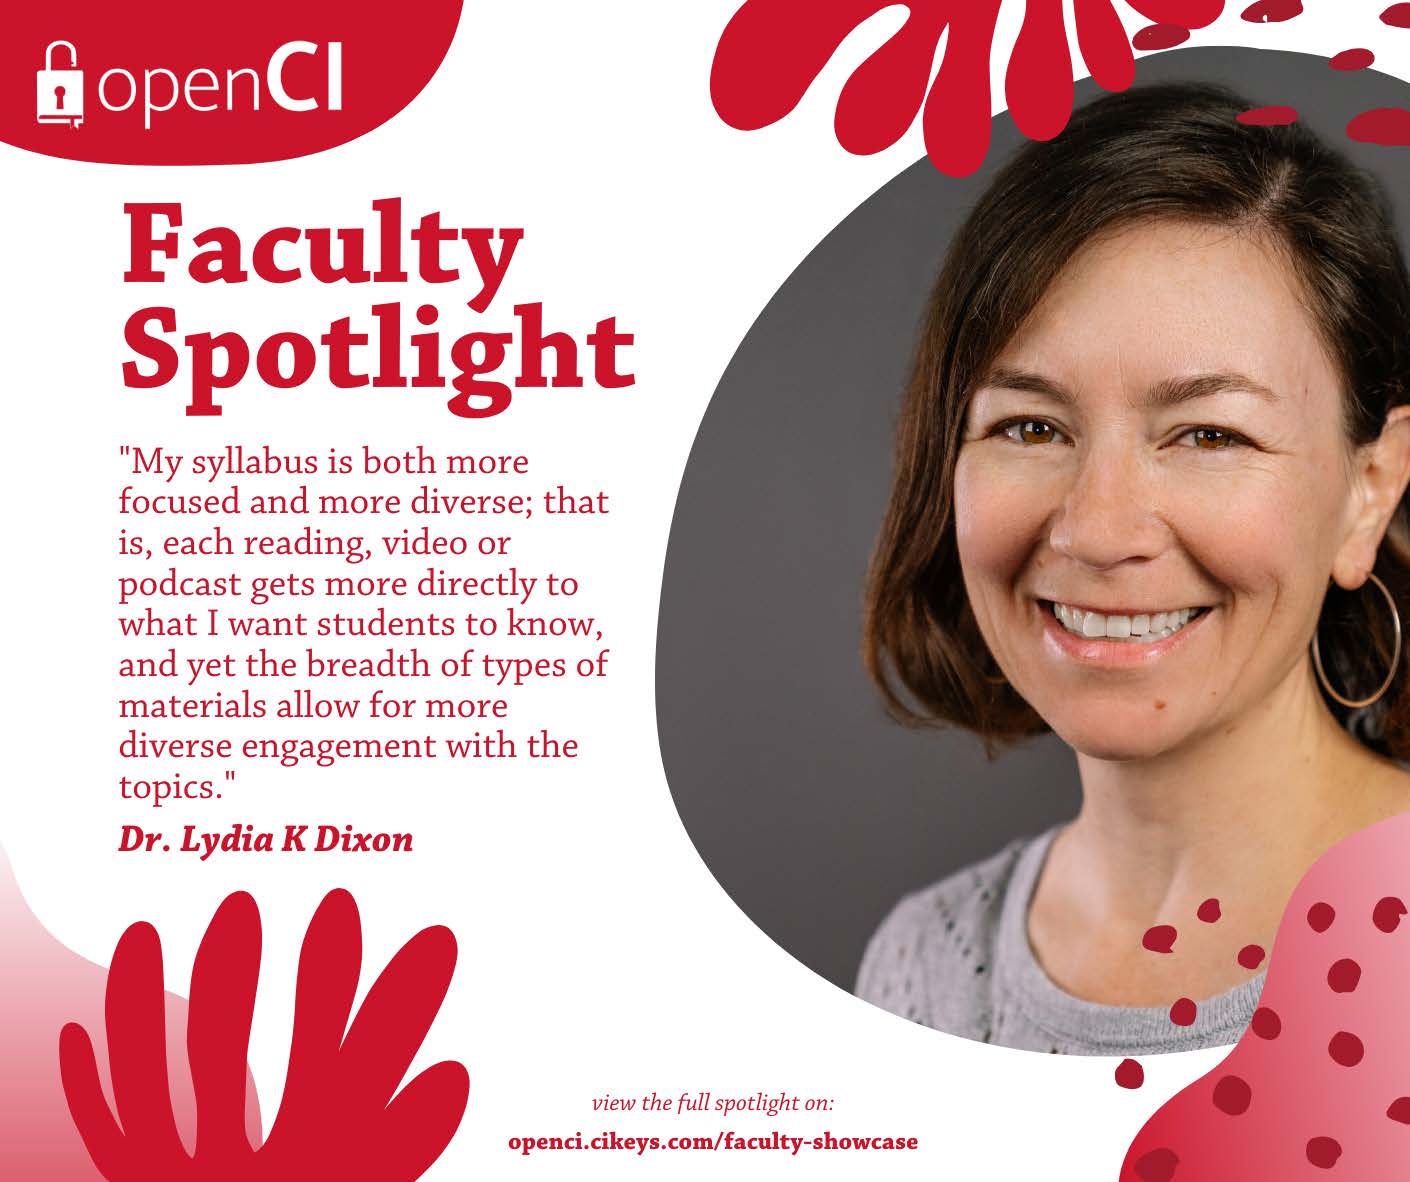 Dr. Dixon Faculty Spotlight "My syllabus is both more focused and diverse; that is, each reading, video, or podcast gets more directly to what I want students to know, and yet the breadth of types of materials allow for more diverse engagement with the topics"